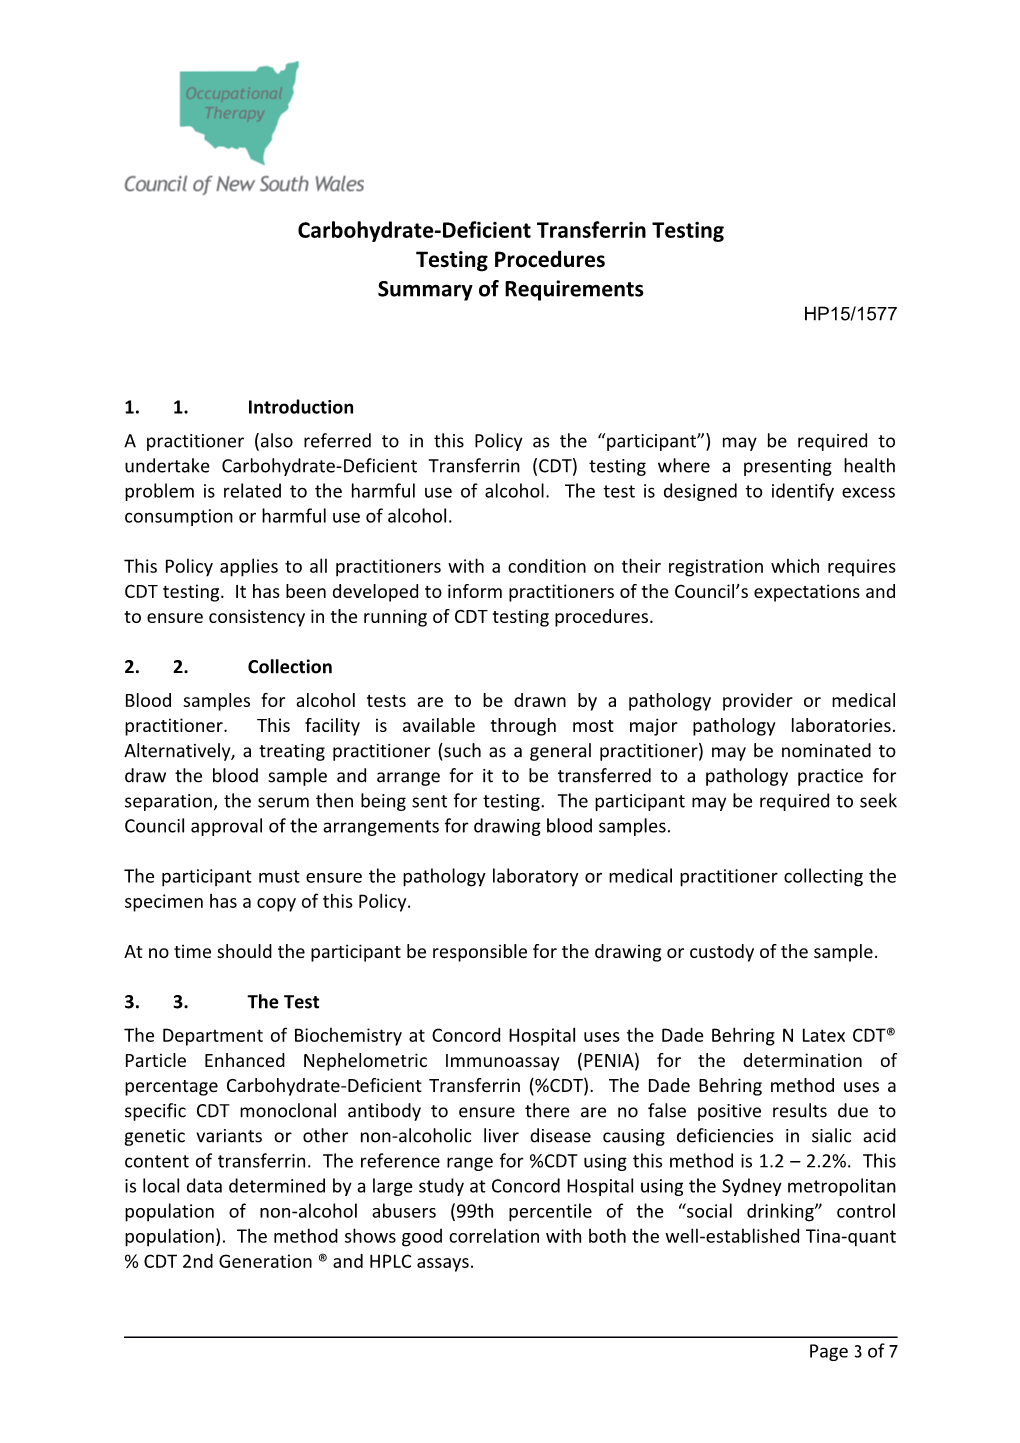 The Occupational Therapy Council S Carbohydrate-Deficient Transferrin (CDT) Testing Policy